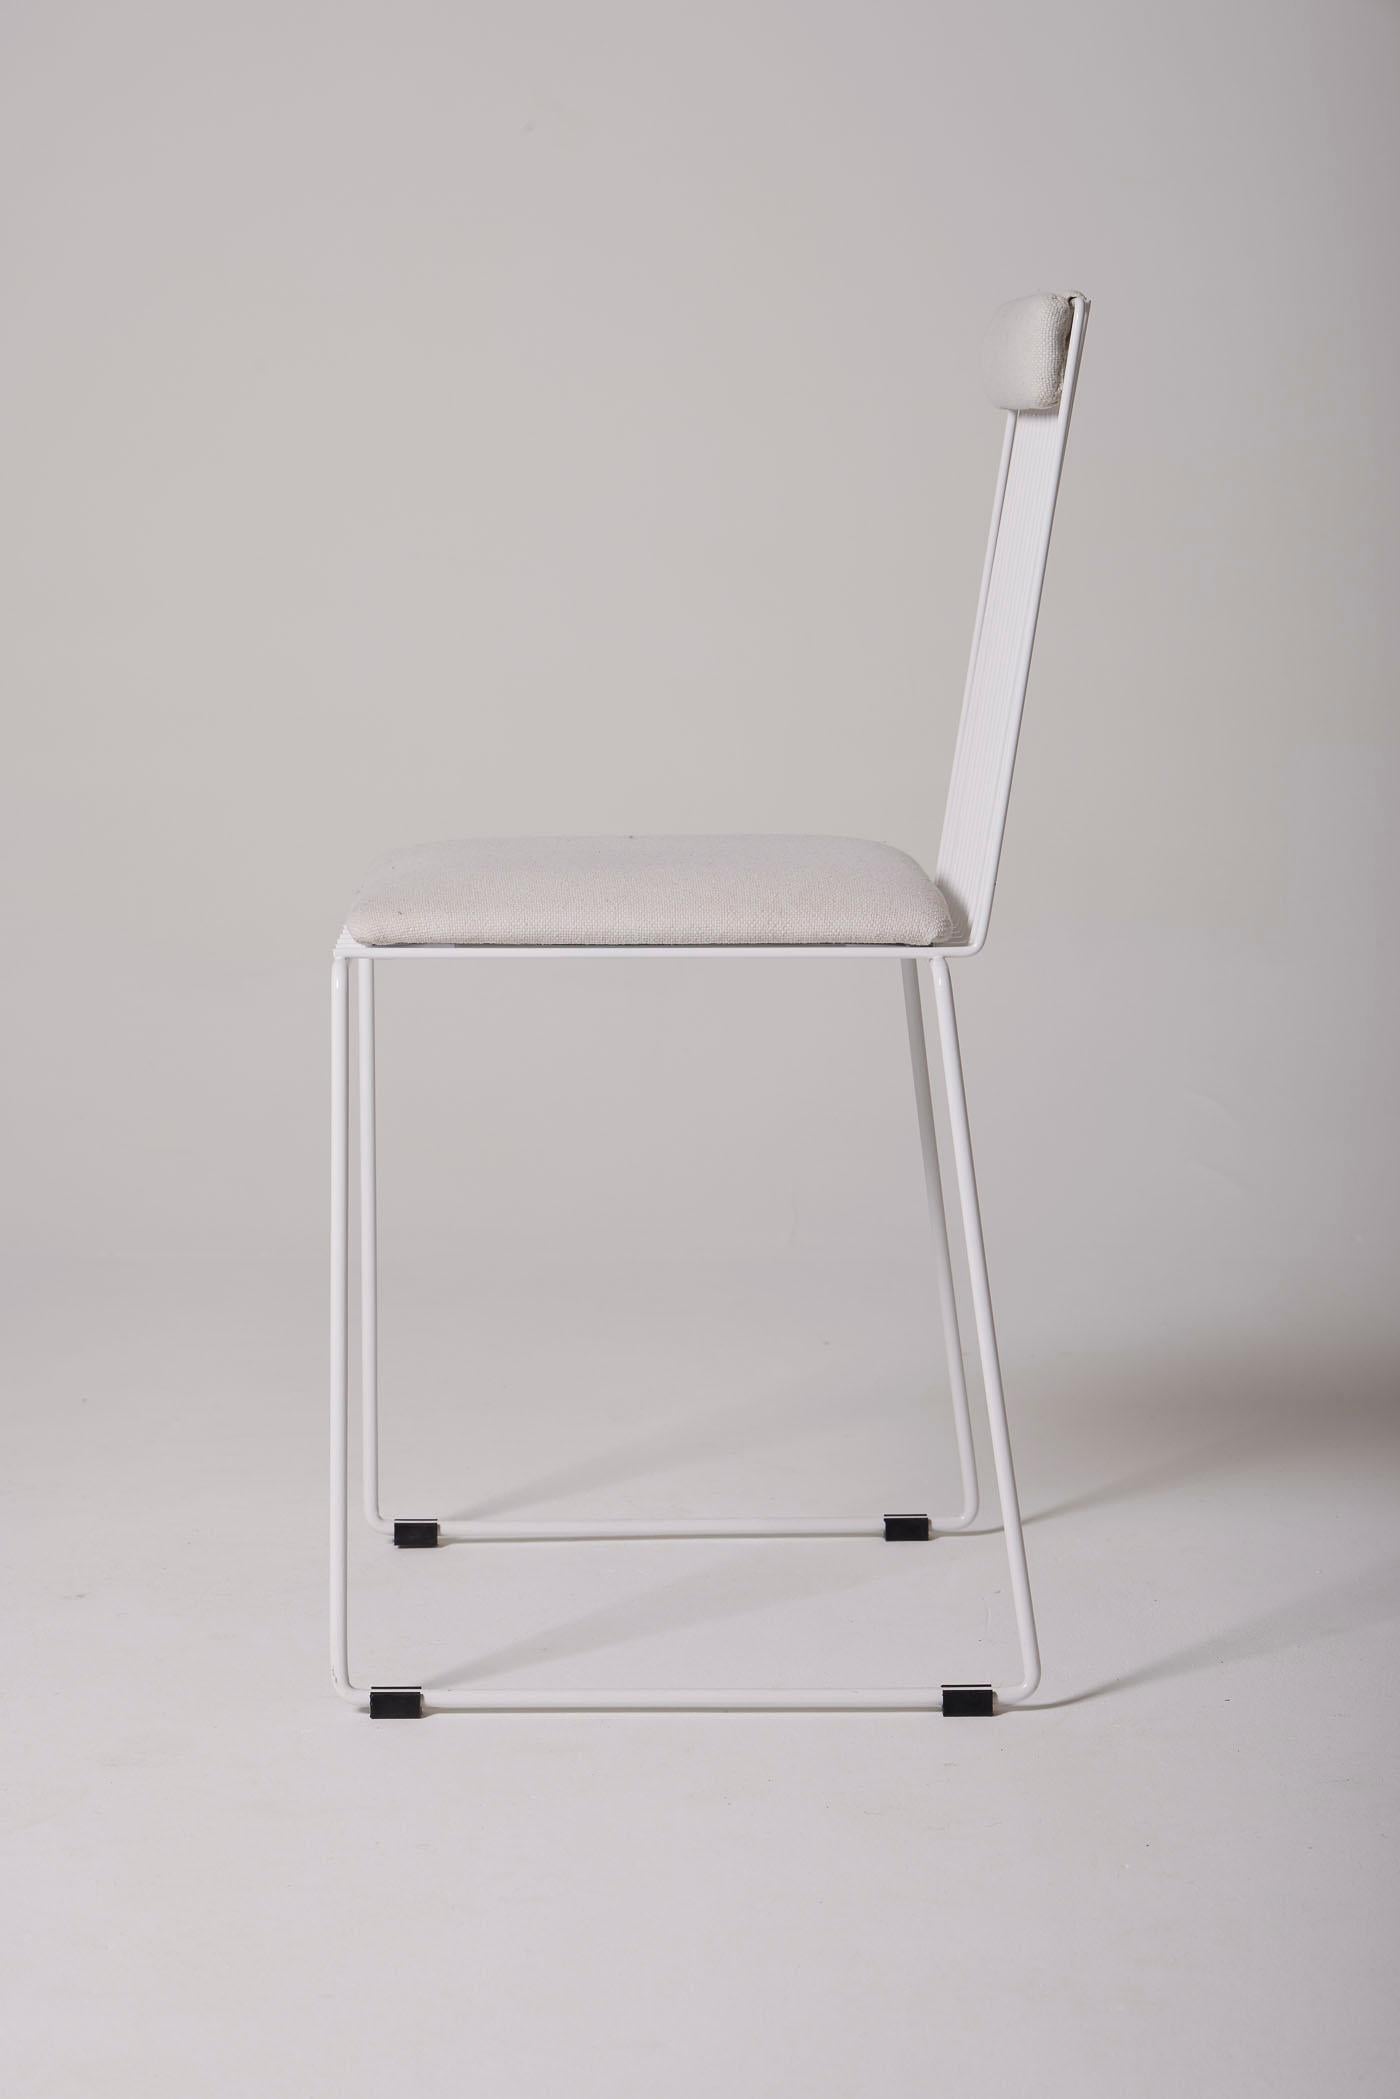 20th Century Chair by François Arnal  For Sale